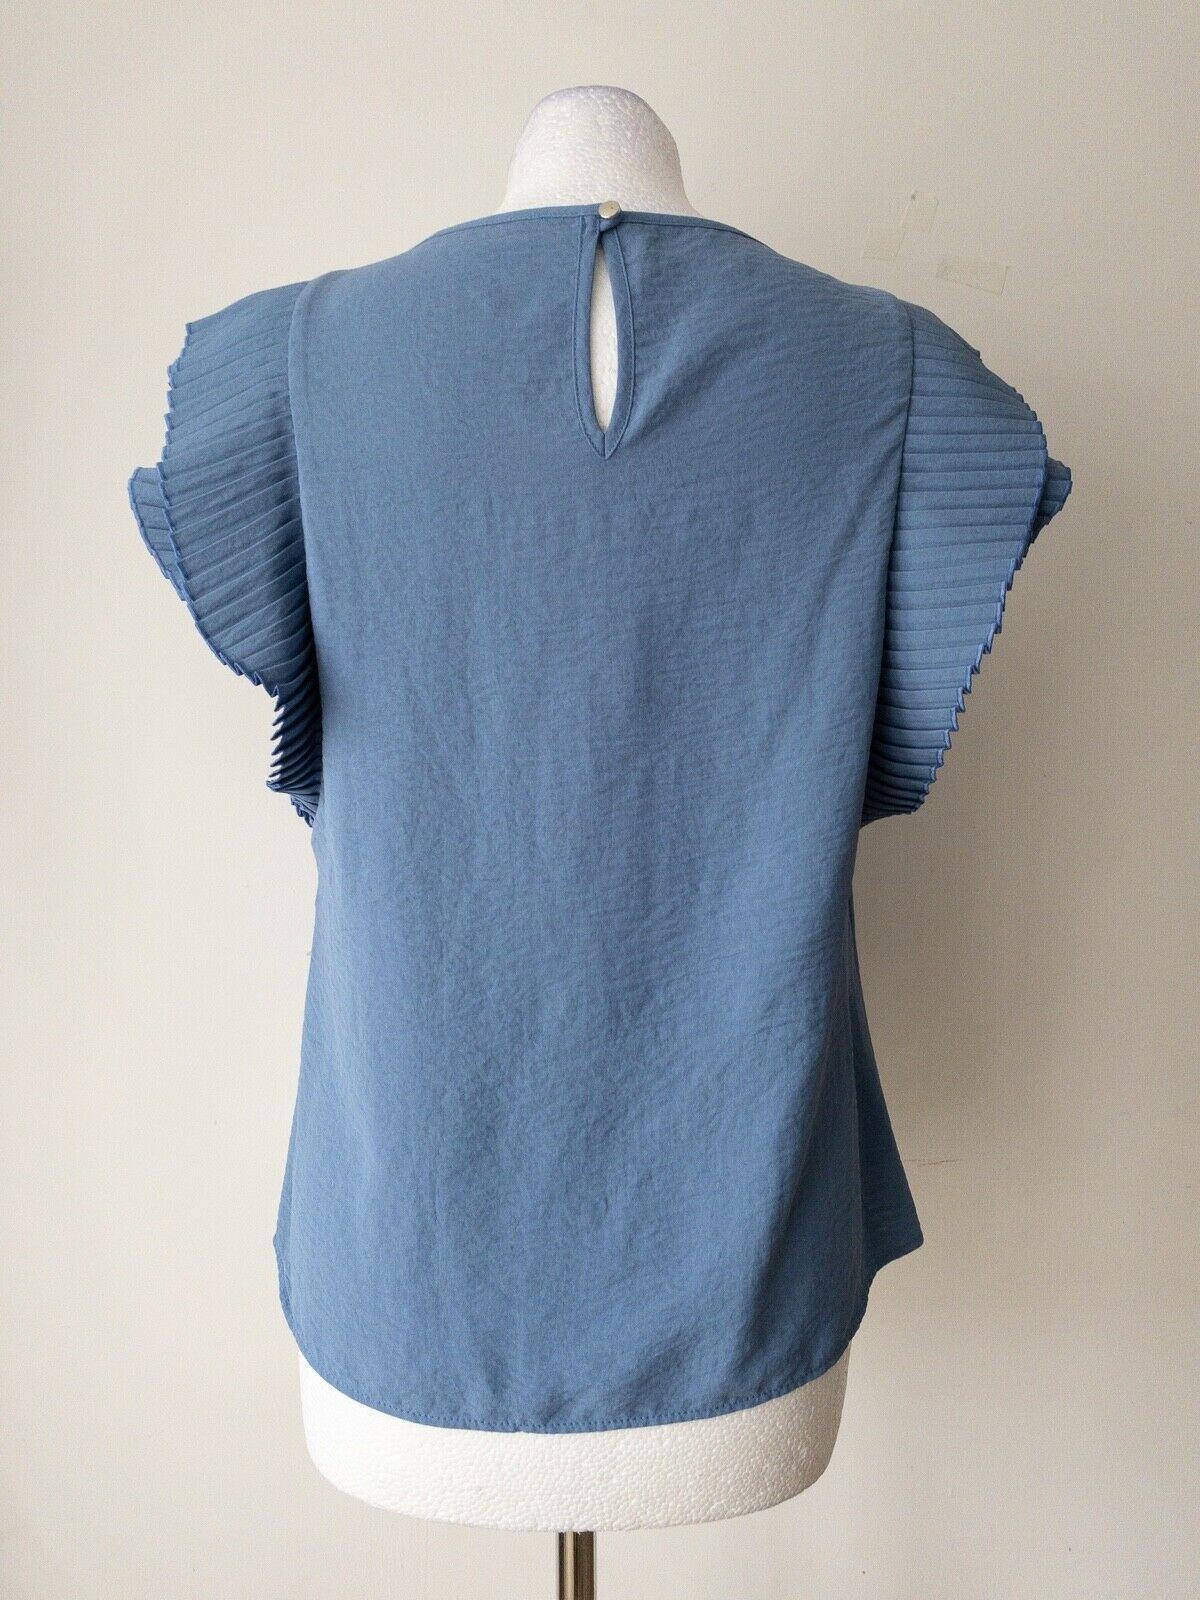 Corn Blue Pin-tuck Fanned Sleeves Blouse Size 10 / 12